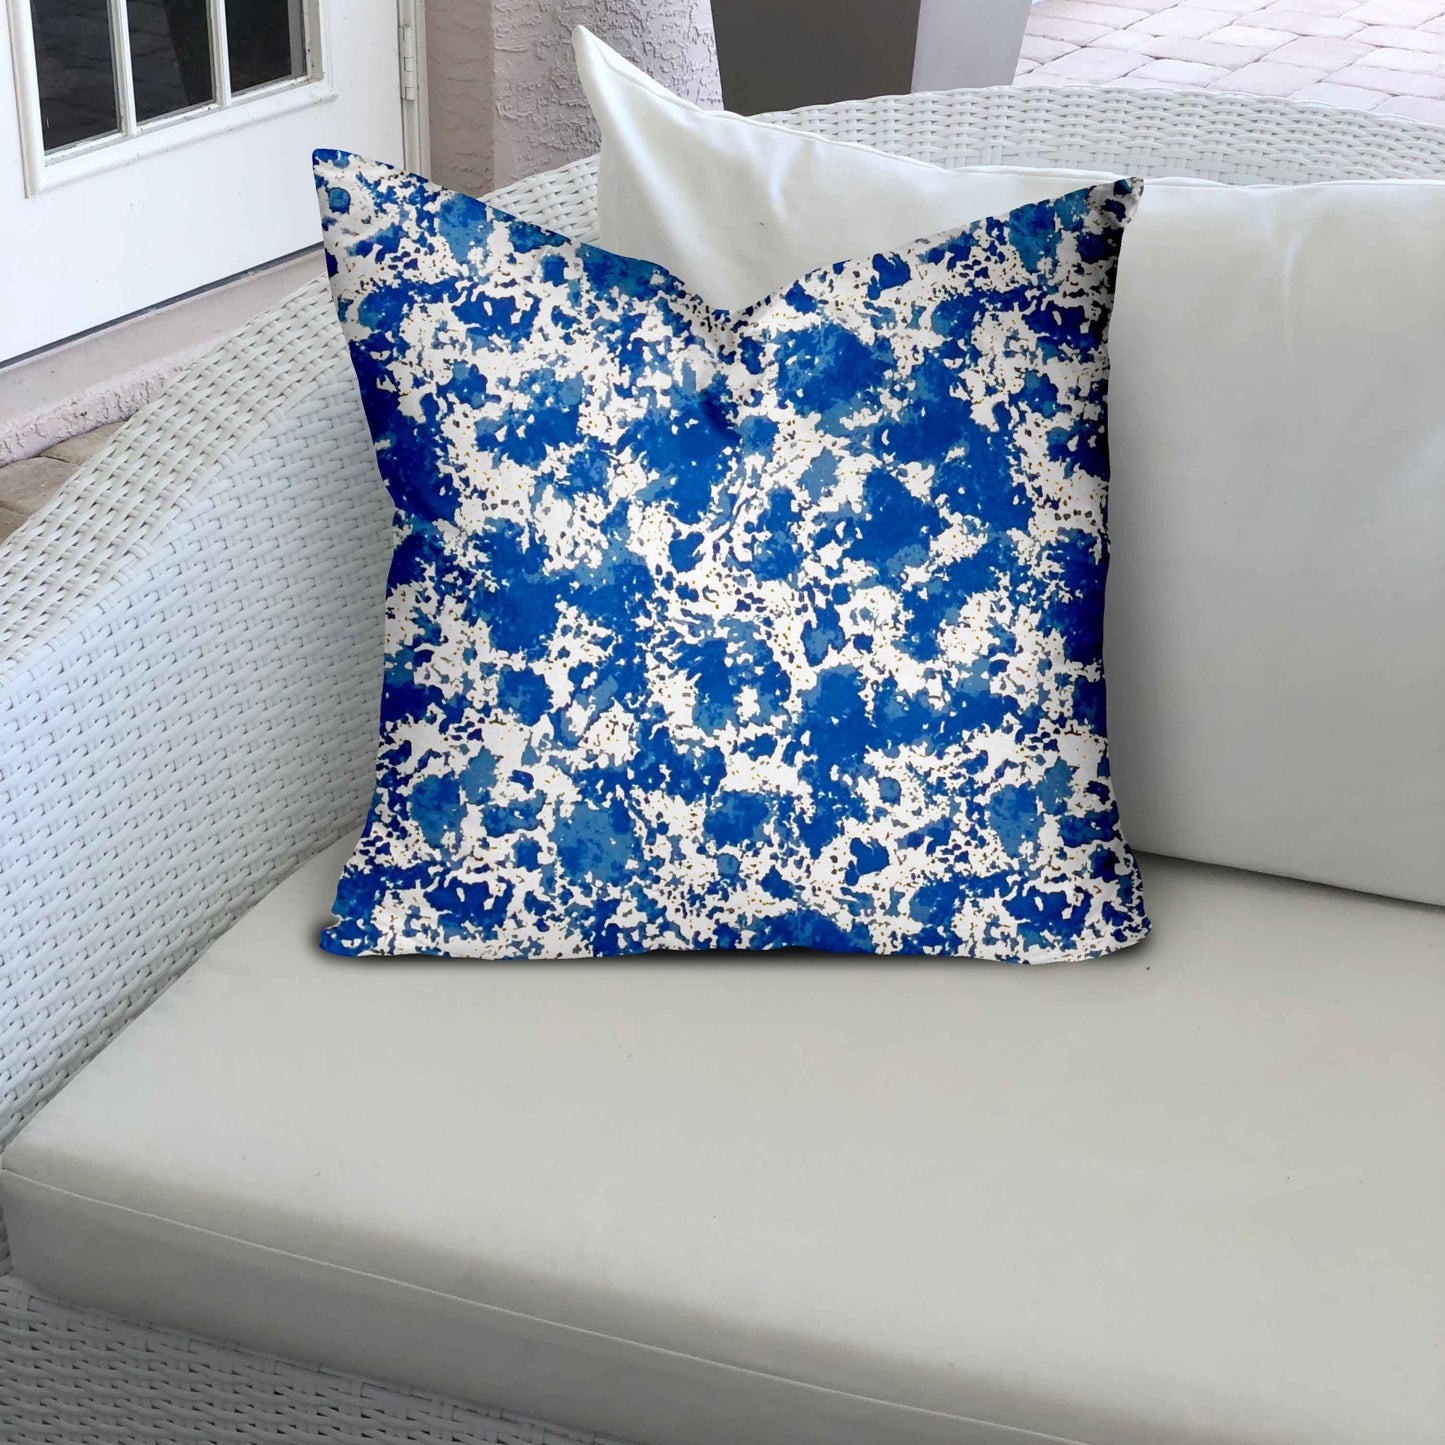 24" X 24" Blue And White Zippered Coastal Throw Indoor Outdoor Pillow Cover